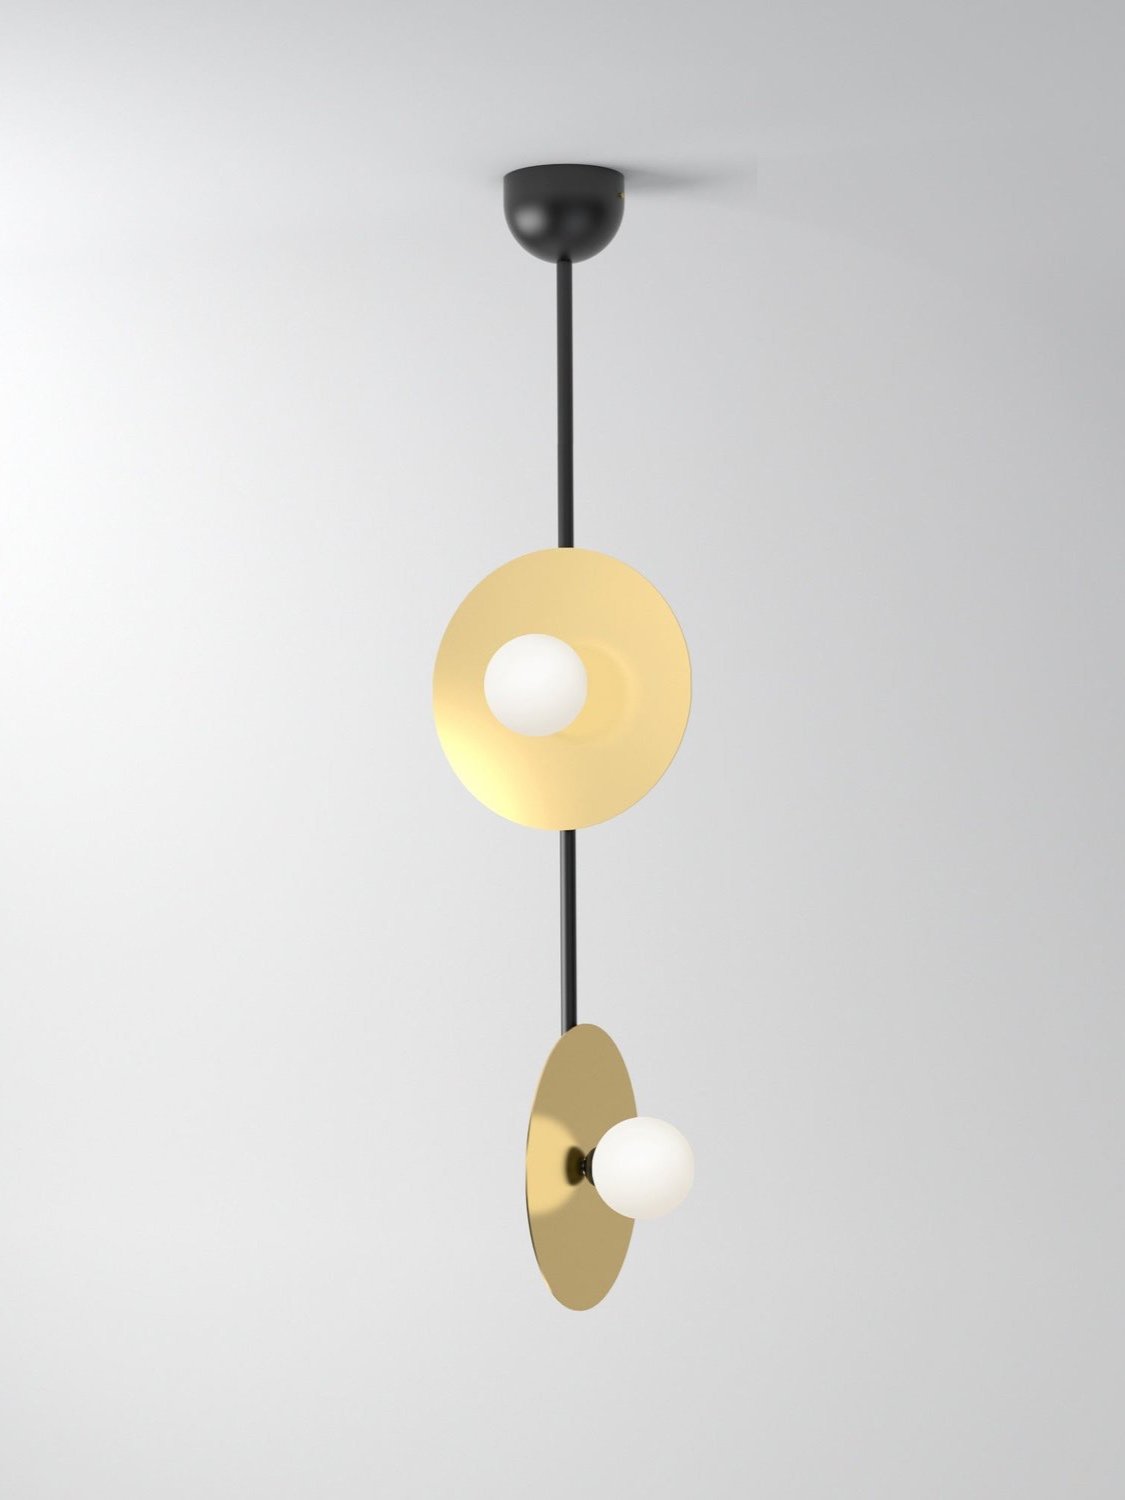 DISC AND SPHERE PENDANT LIGHT / VERTICAL - 2 DISC / DOME ATTACHMENT 